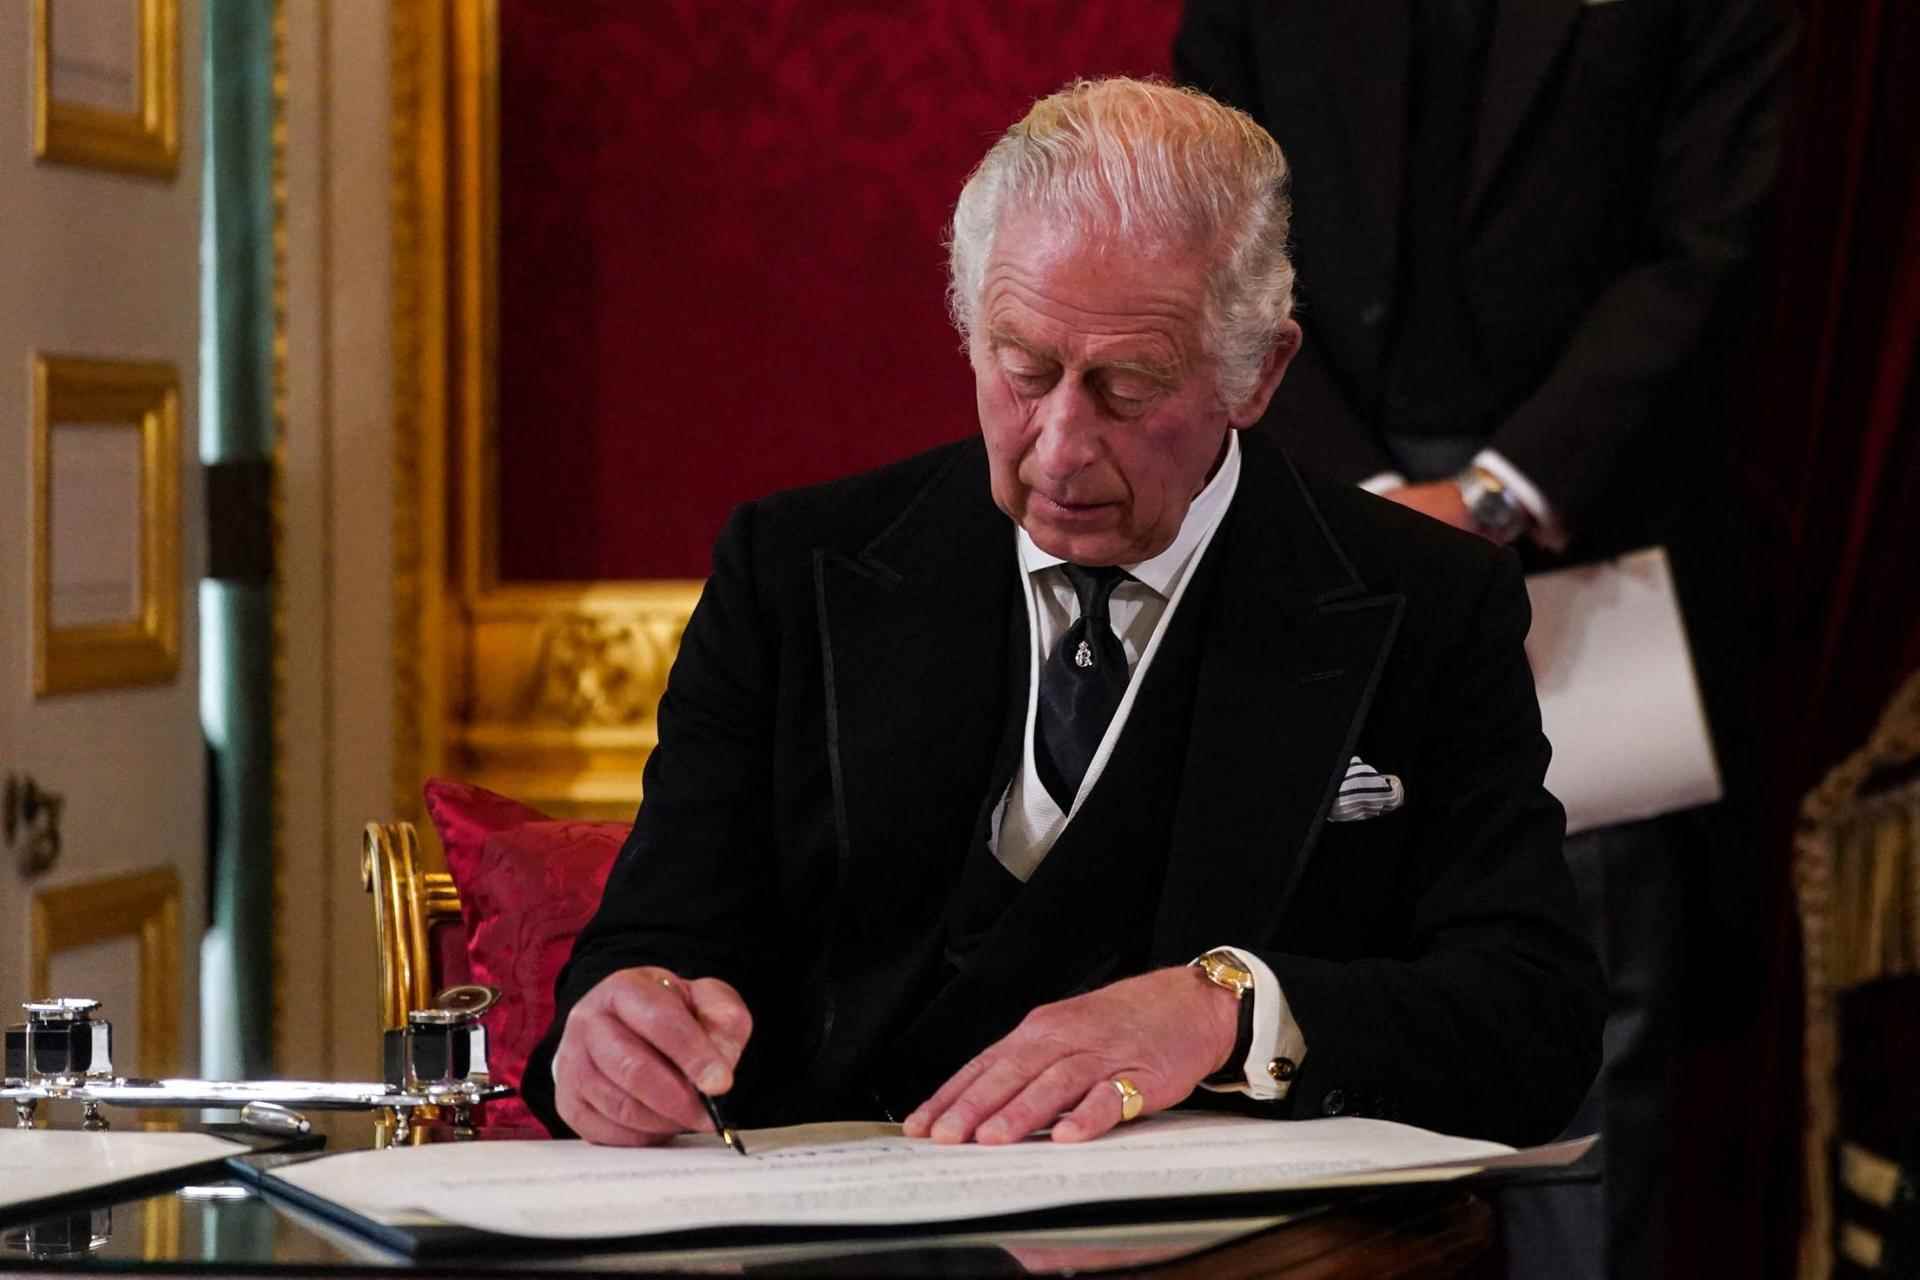 Charles III signs an oath pledging him to provide security for the Anglican Church of Scotland, during the Accession Council meeting proclaiming his arrival to the throne, at St. James's Palace, London, September 10 2022.